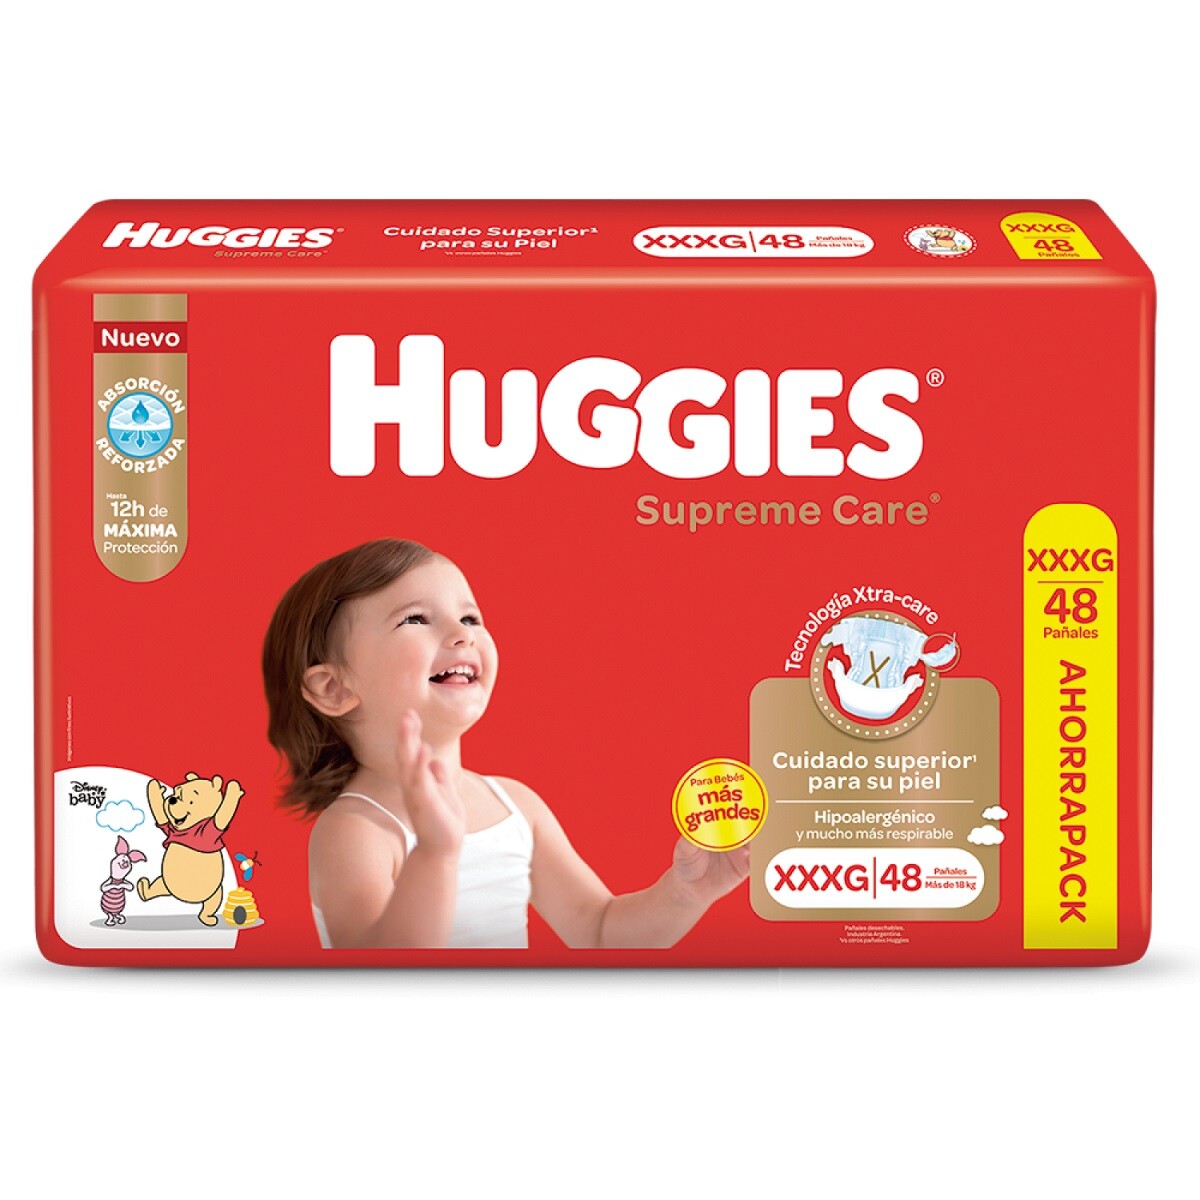 Pañales Huggies Supreme Care Talle Xxxg 48 Uds. 